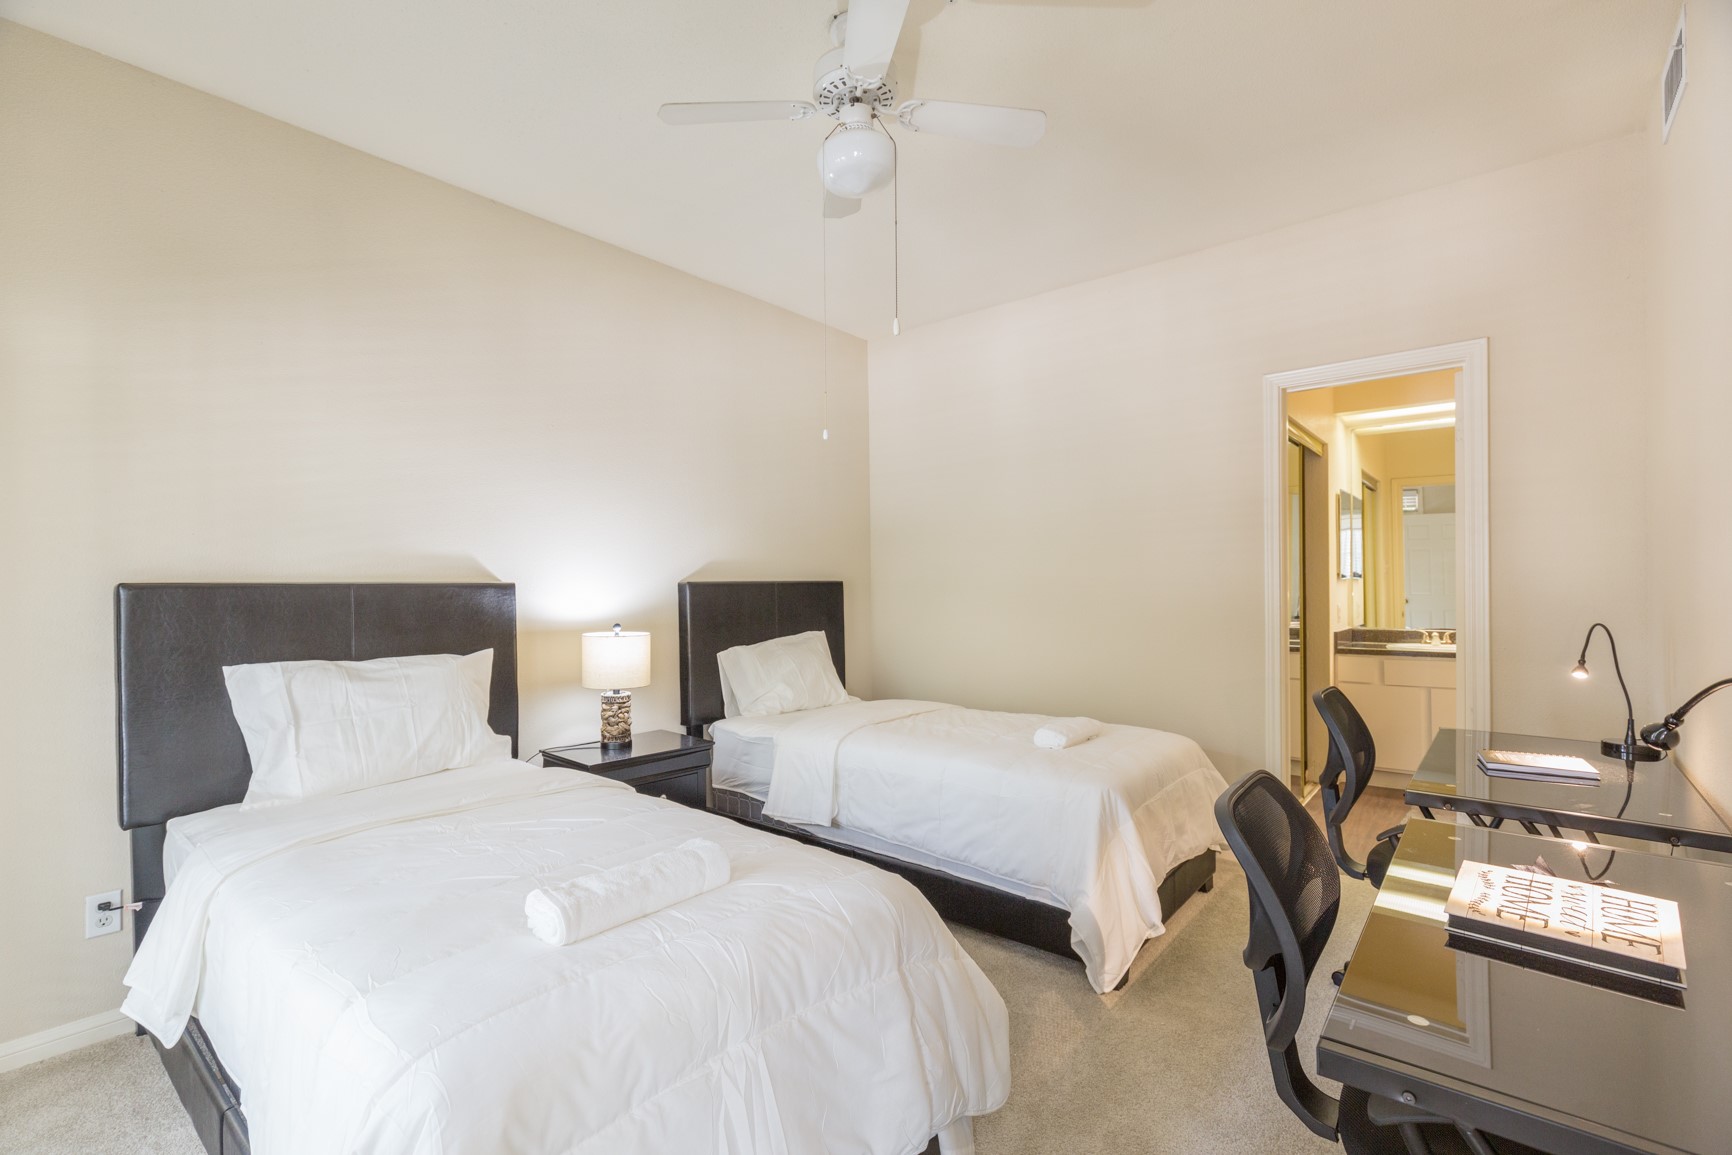 A double occupancy bedroom at Houston Student Residence in Texas, USA that is home to ELS Language Centers students.